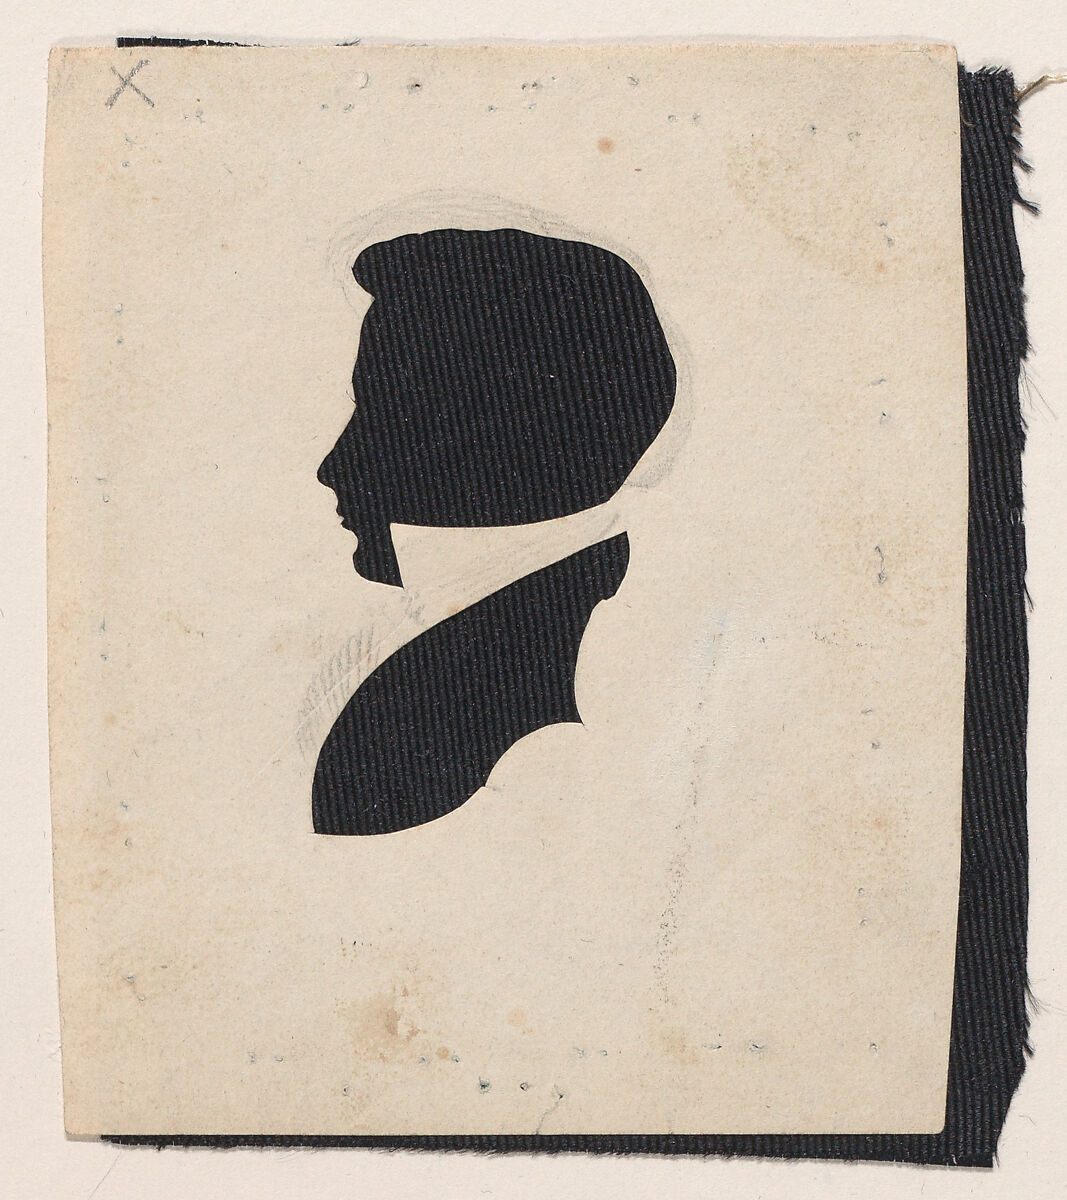 Silhouette of Giles H. Case, to left, Probably by William Chamberlain (American, born Loudon, New Hampshire, 1790), Hollow cut paper 